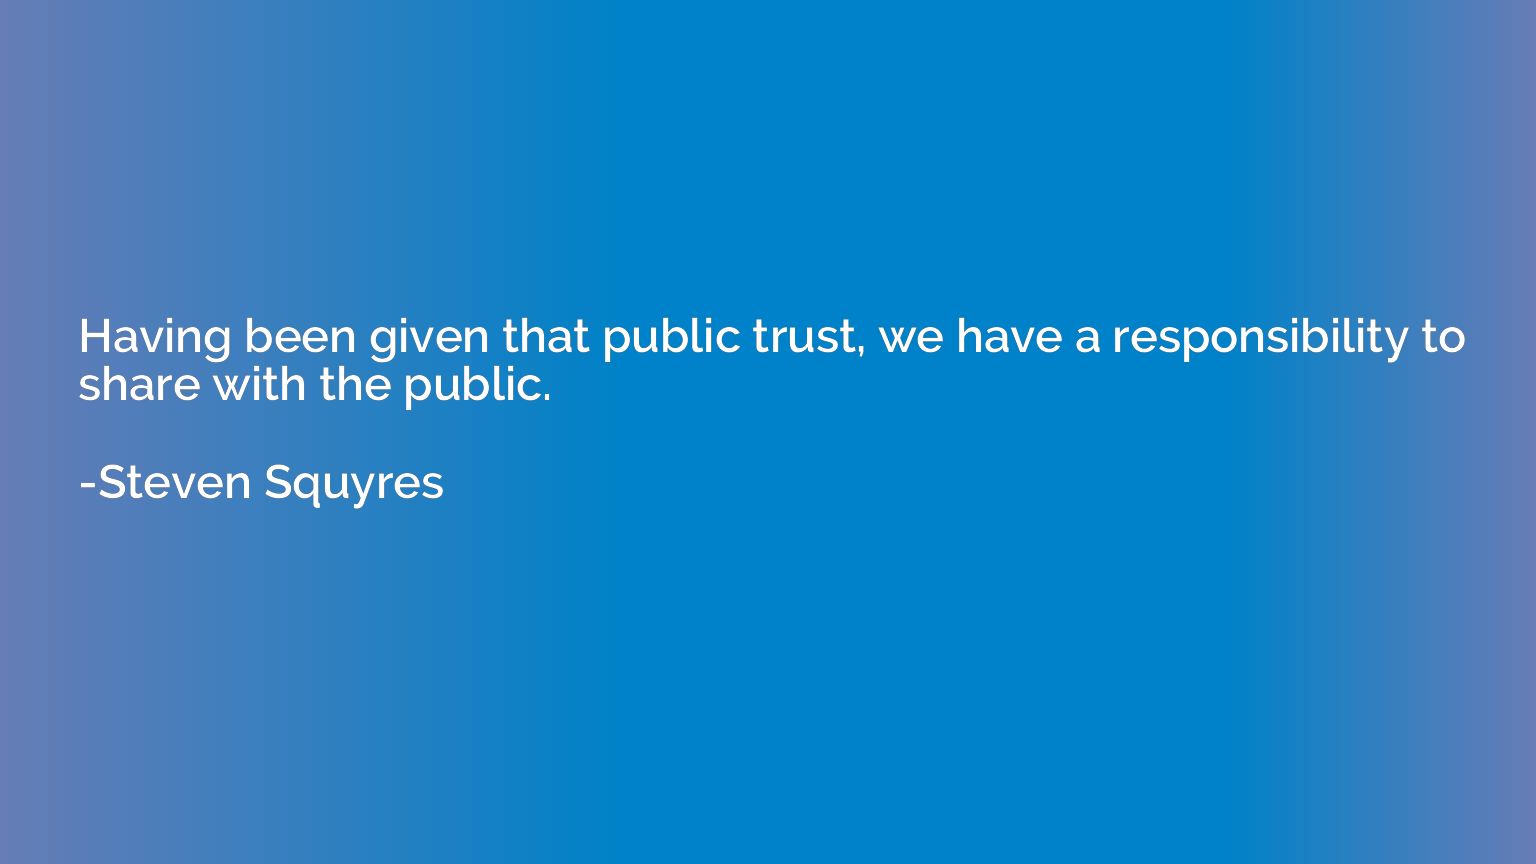 Having been given that public trust, we have a responsibilit